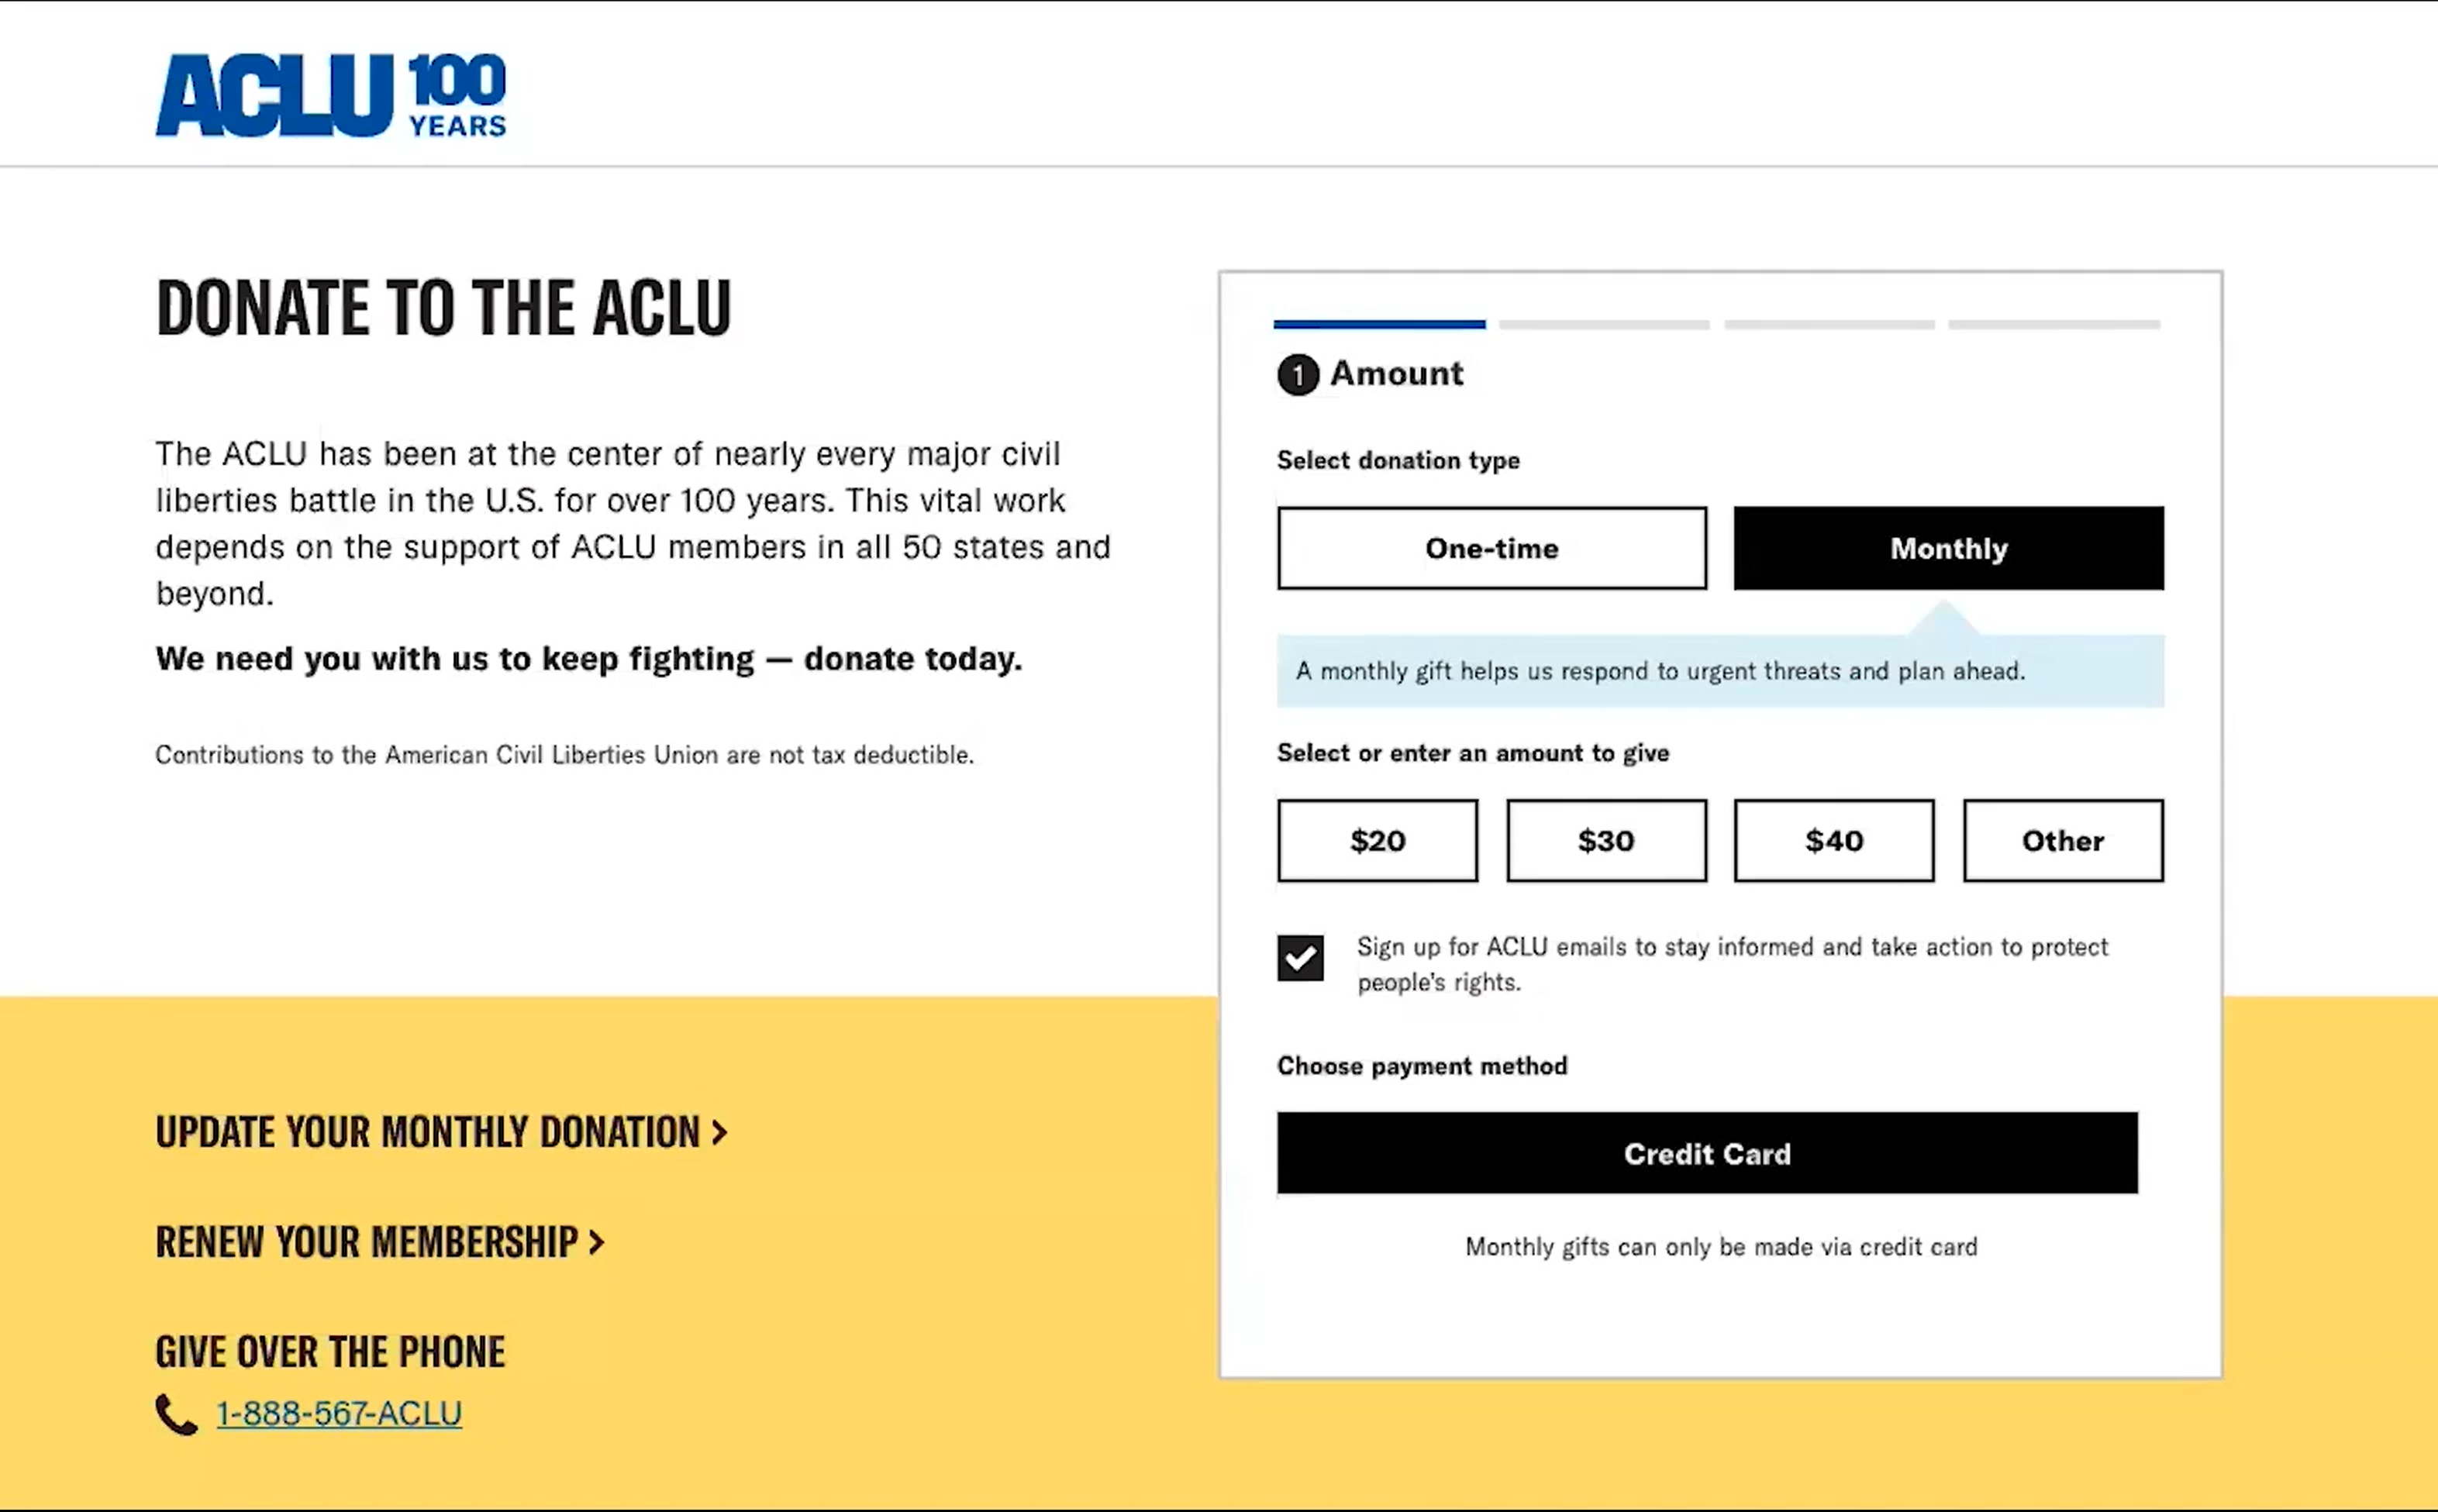 The ACLU General Donation Page has side by side content and form with no header navigation.